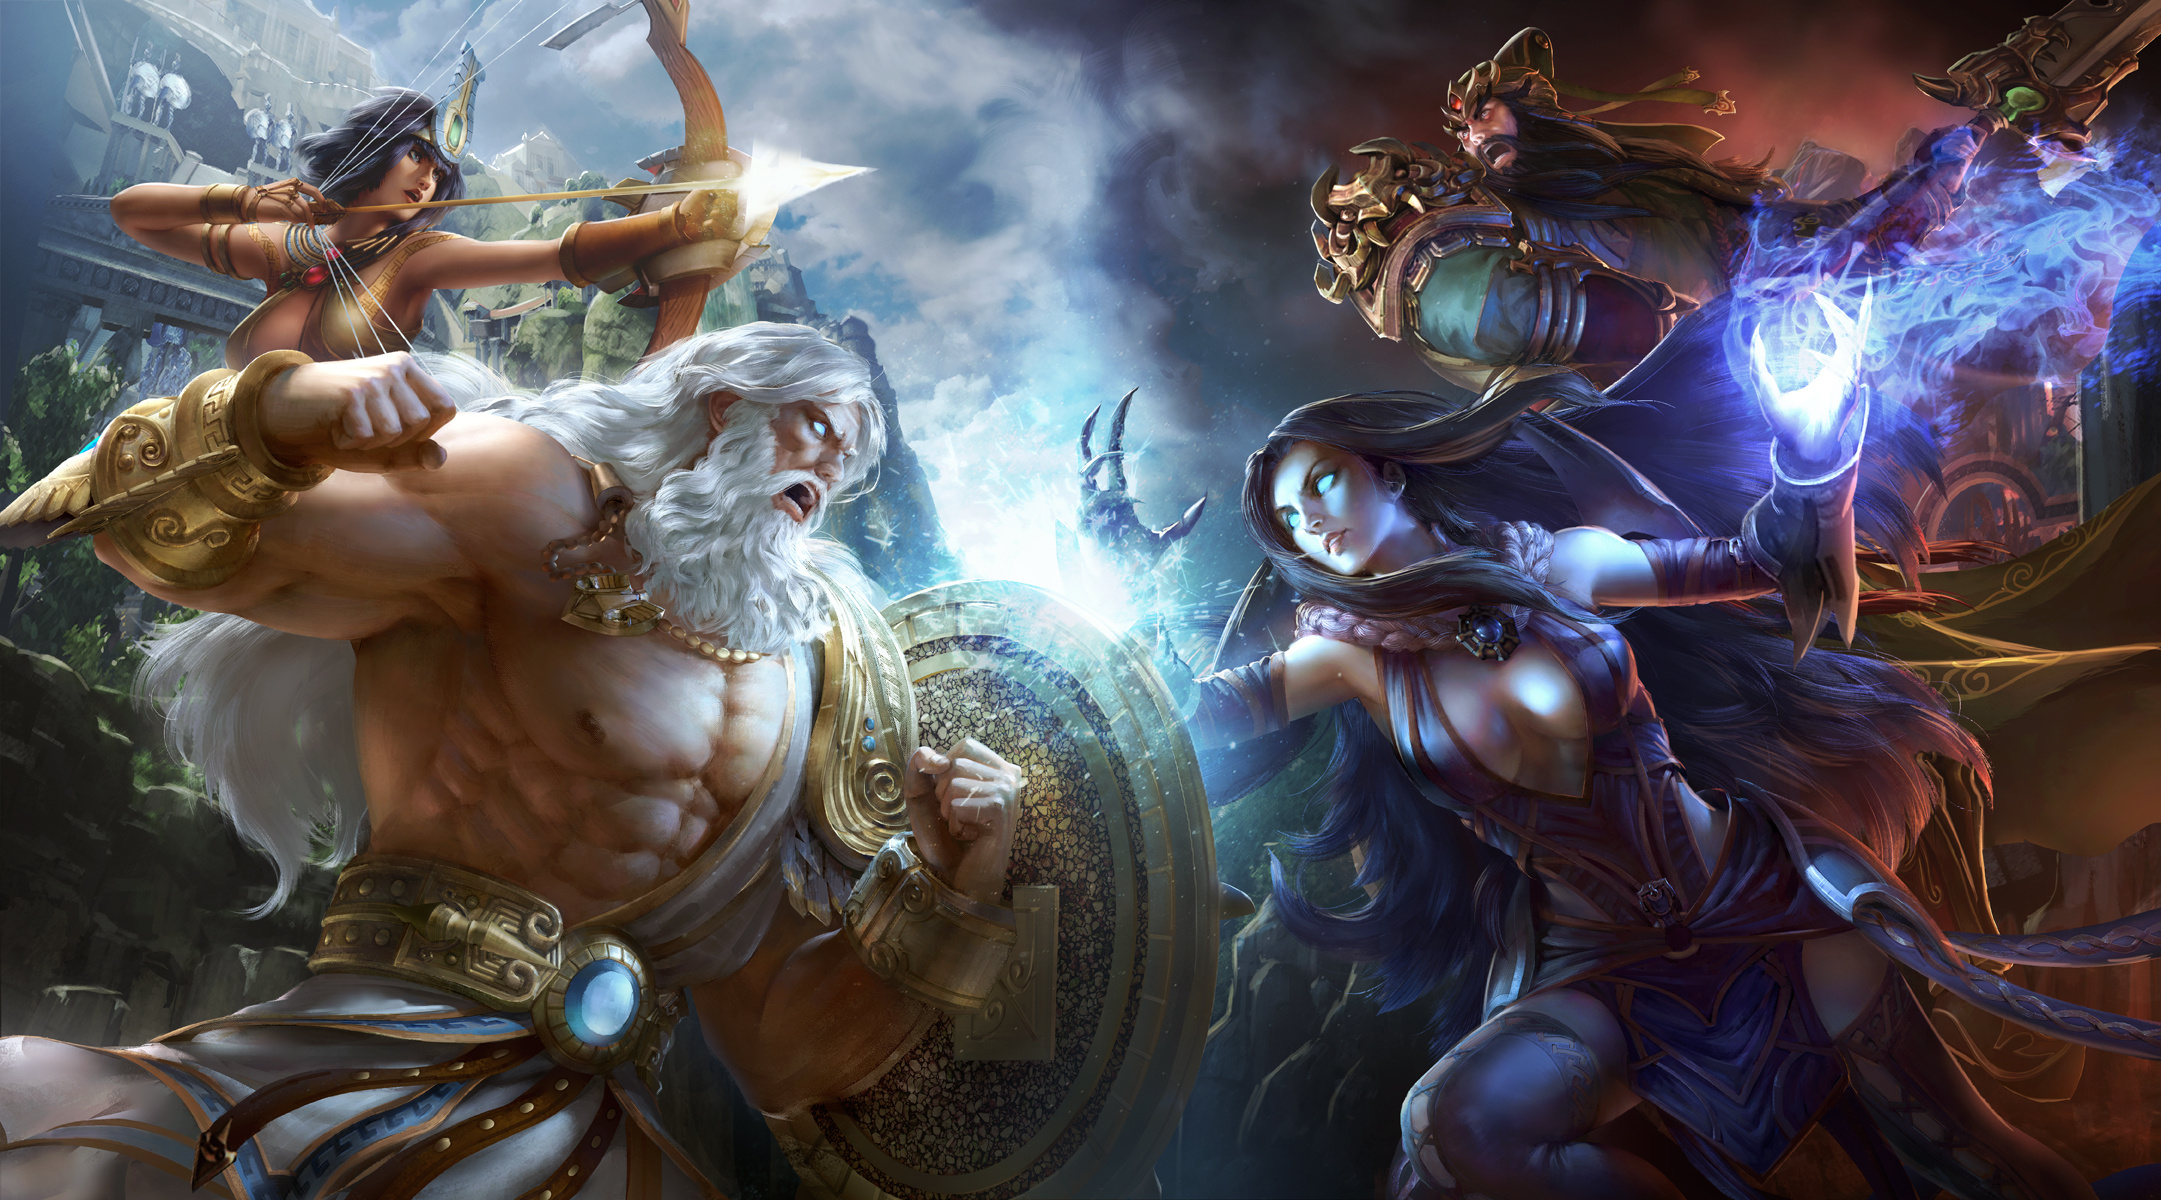 Zeus: Smite, A 2014 free-to-play, third-person multiplayer online battle arena video game. 2170x1200 HD Wallpaper.